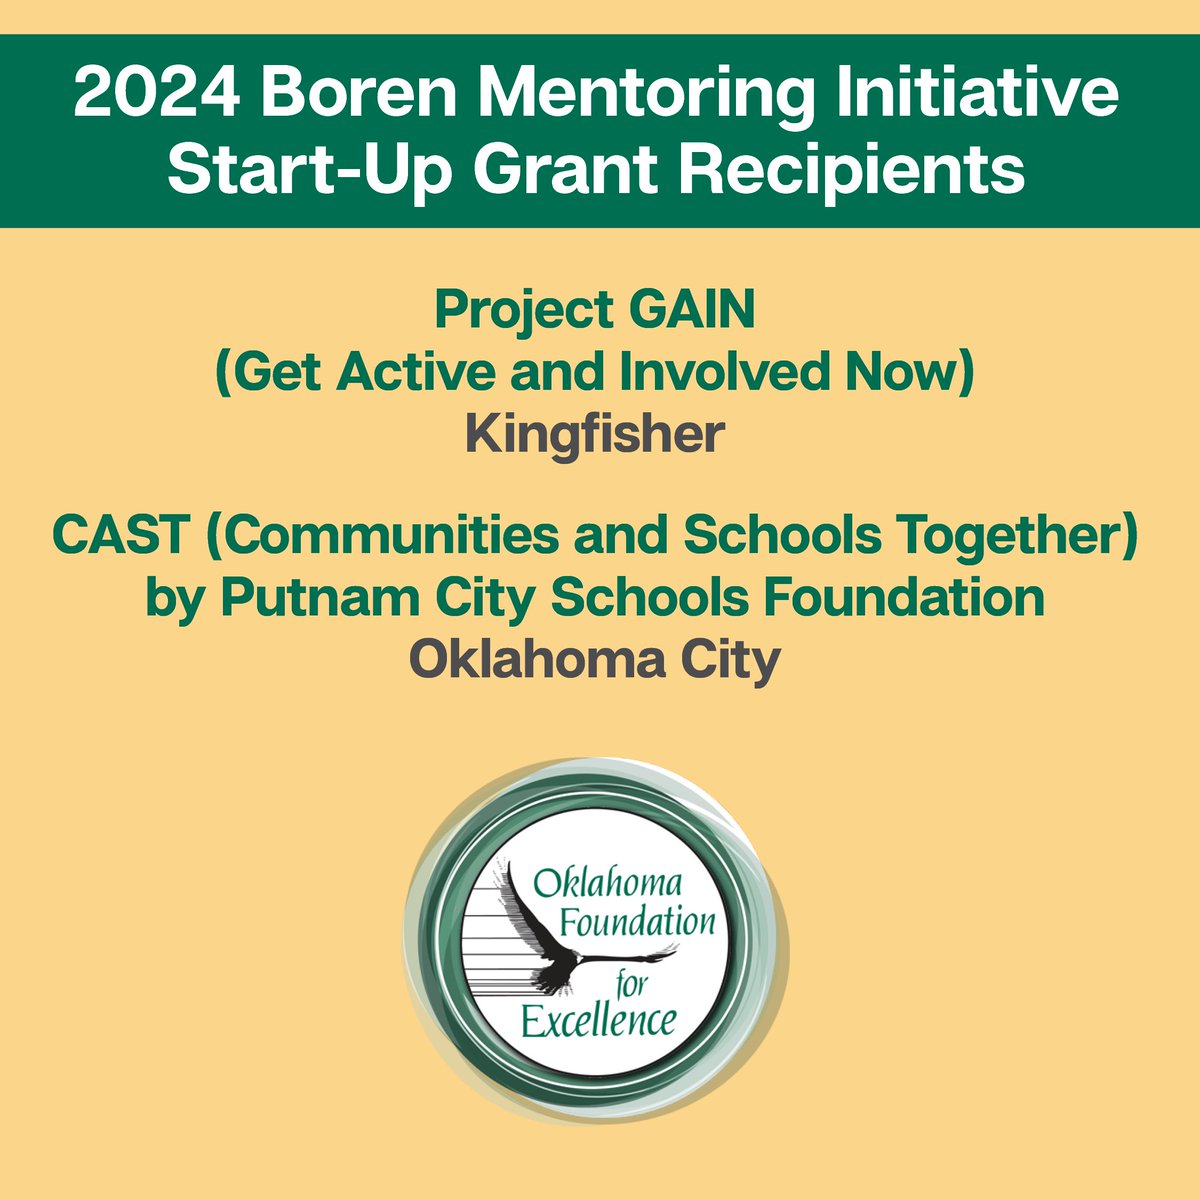 Congratulations to Project GAIN of Kingfisher and CAST by the Putnam City Schools Foundation. These two programs are recipients of $3,000 start-up grants from OFE’s Boren Mentoring Initiative. To learn more about the 2024 recipients, visit ow.ly/UAjF50R2uuQ #oklaed